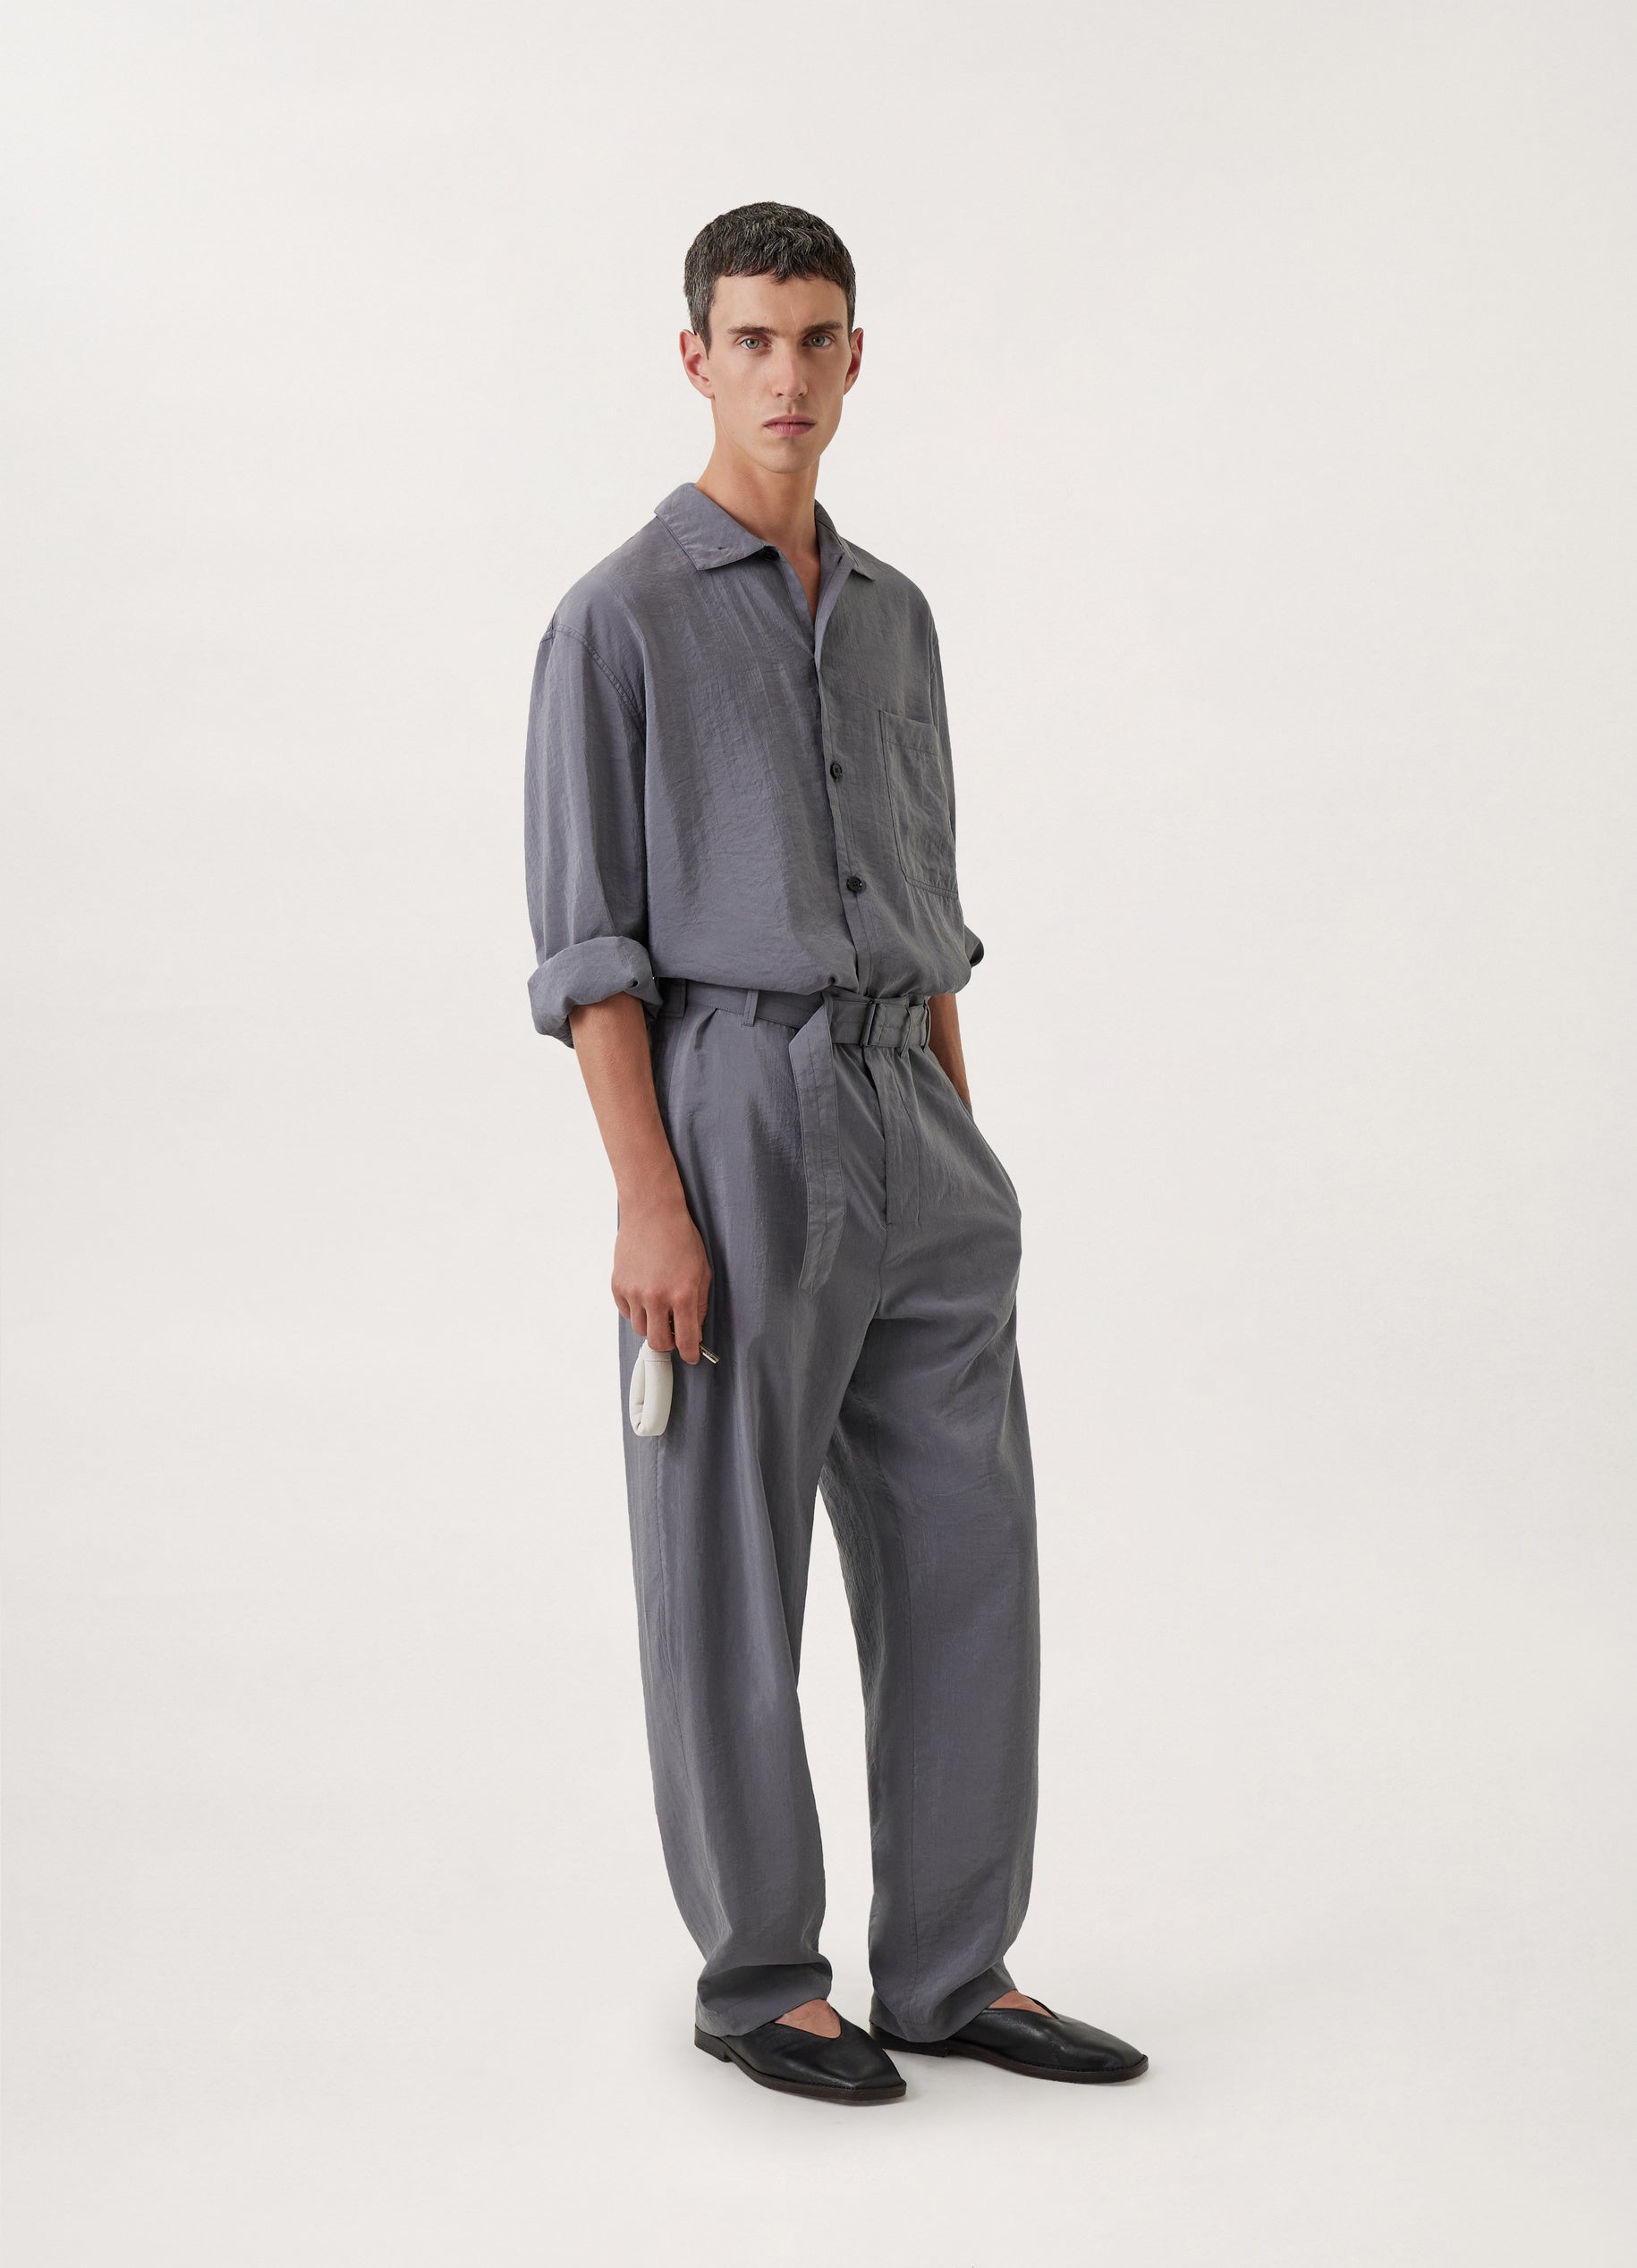 LEMAIRE BELTED PLEAT PANTS 46 21aw - スラックス